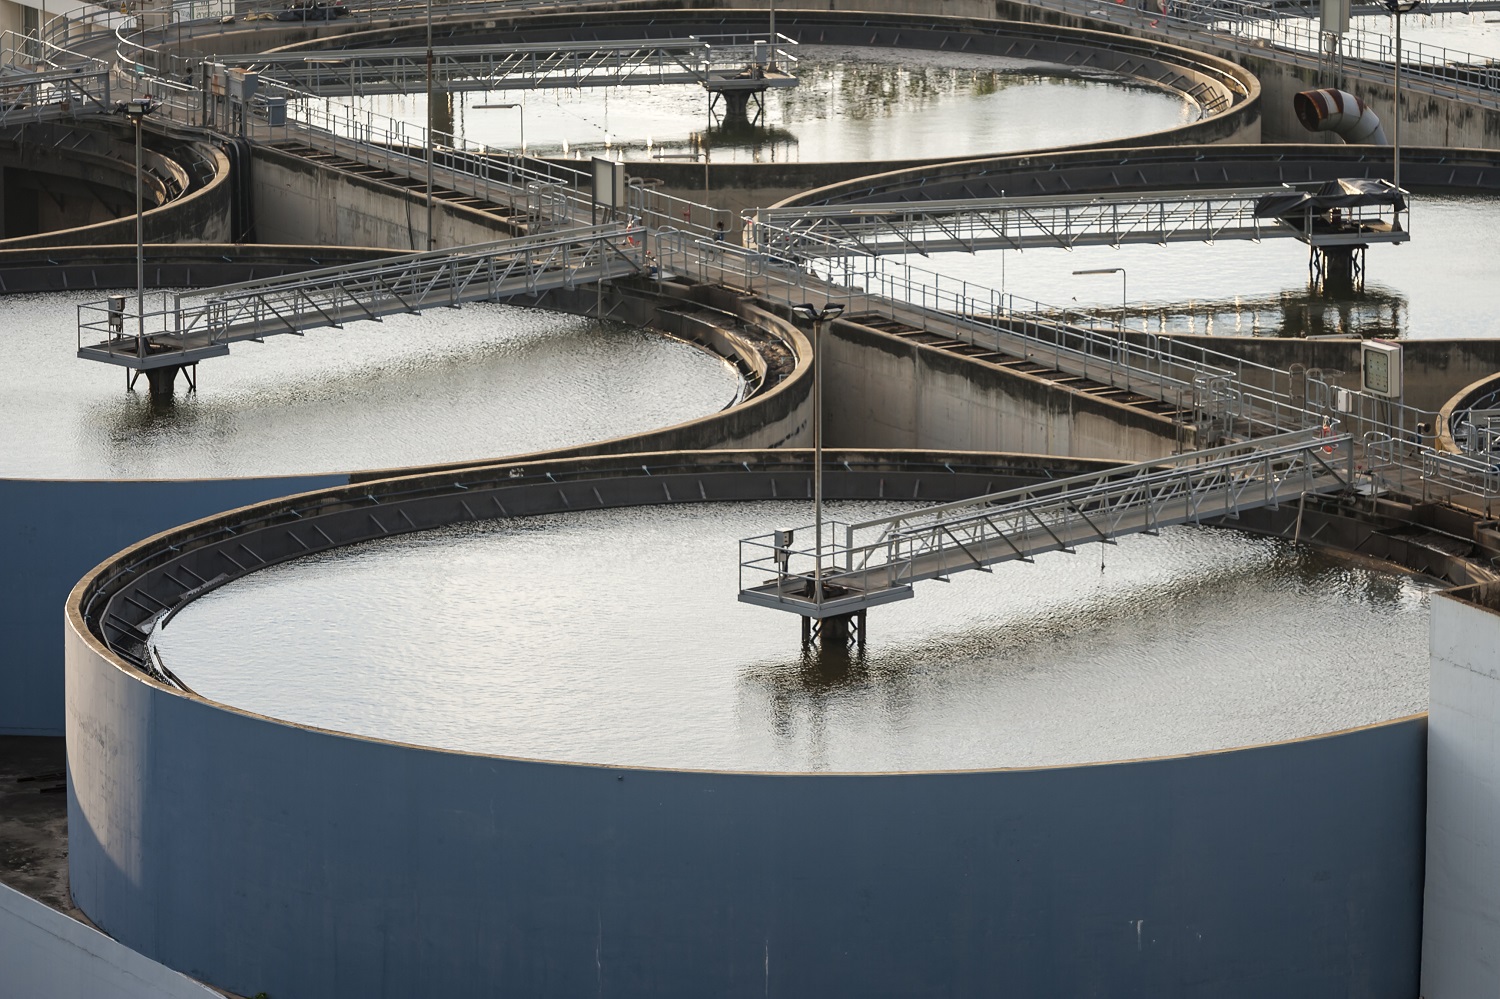 The study showed that tracking the flow behaviour of sludge can help engineers and plant operators to see how quickly organic matter dissolves at high temperatures. (Image: Shutterstock)